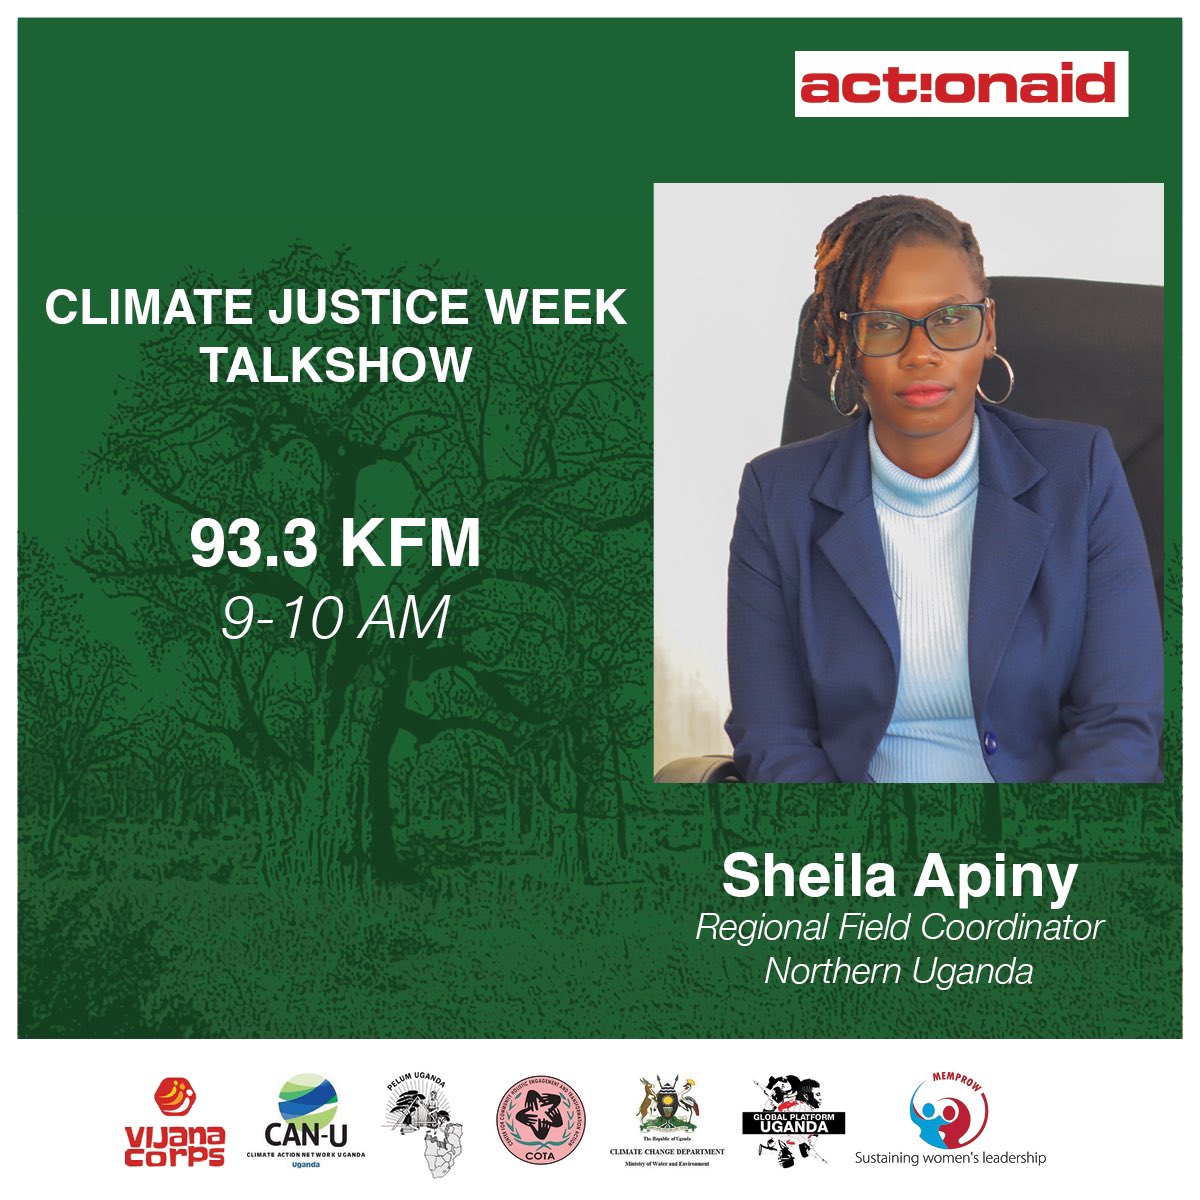 .@actionaiduganda has been running a campaign on Climate Change from April echoing the importance of prioritizing the voices and needs of vulnerable communities to ensure resilience.

Tune in to @933kfm for more on this! 

#ClimateJusticeWeekUG.
#FixtheFinance  #FundOurFuture